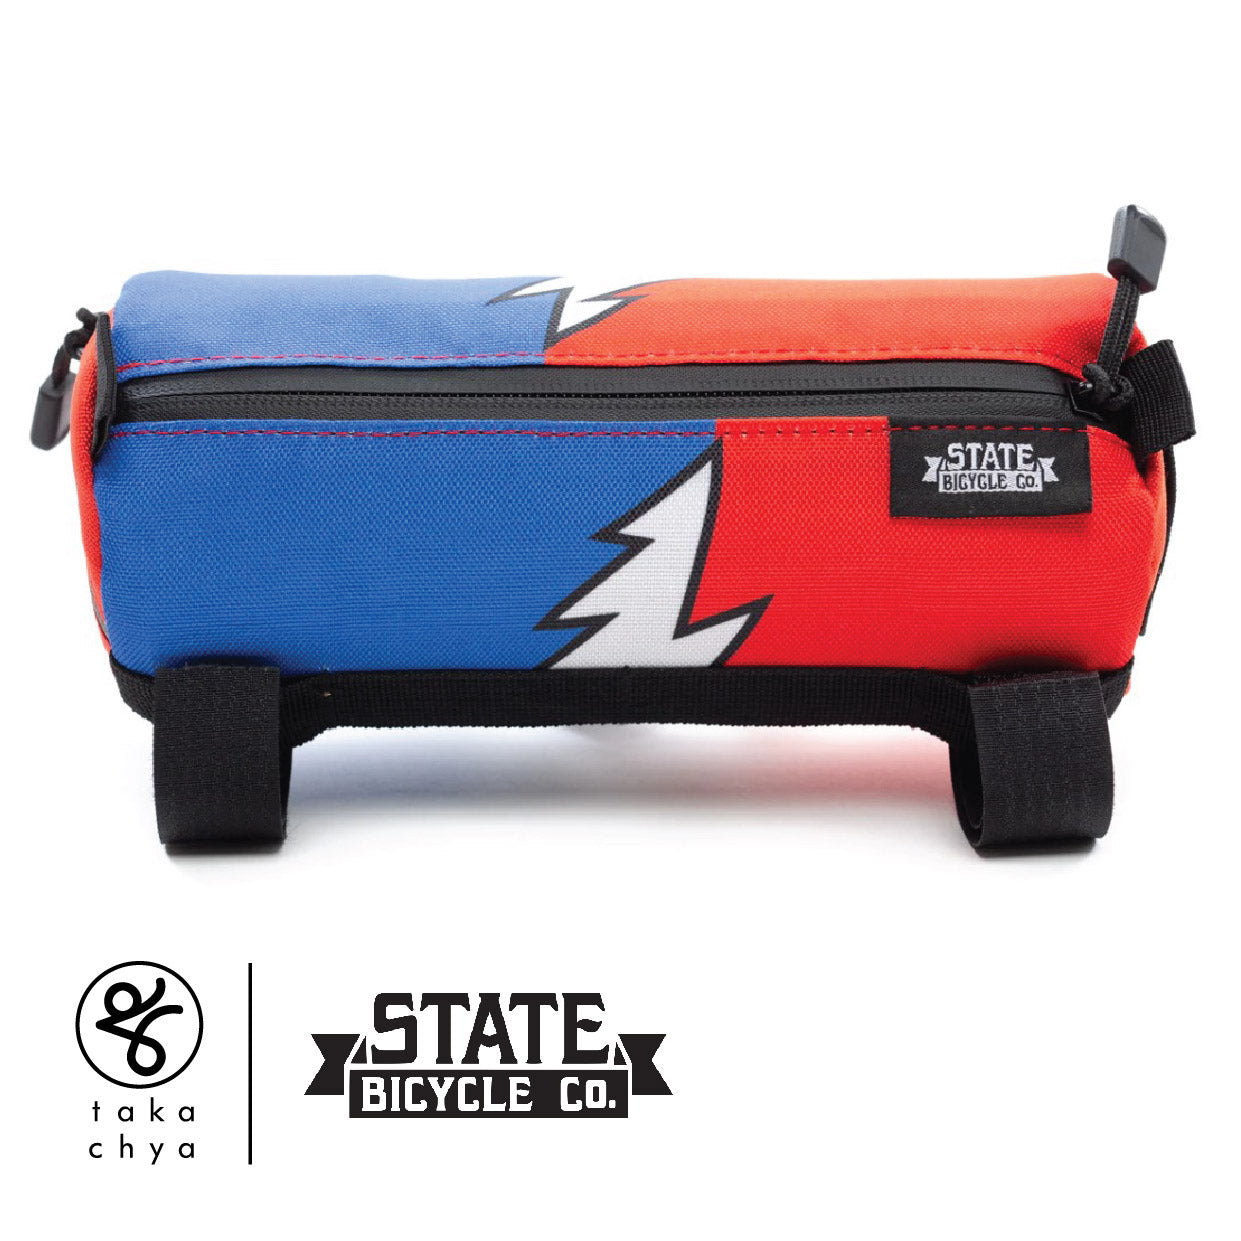 STATE BICYCLE CO. X THE GRATEFUL DEAD LIMITED EDITION - "LIGHTNING BOLT" ALL-ROAD BAR BAG